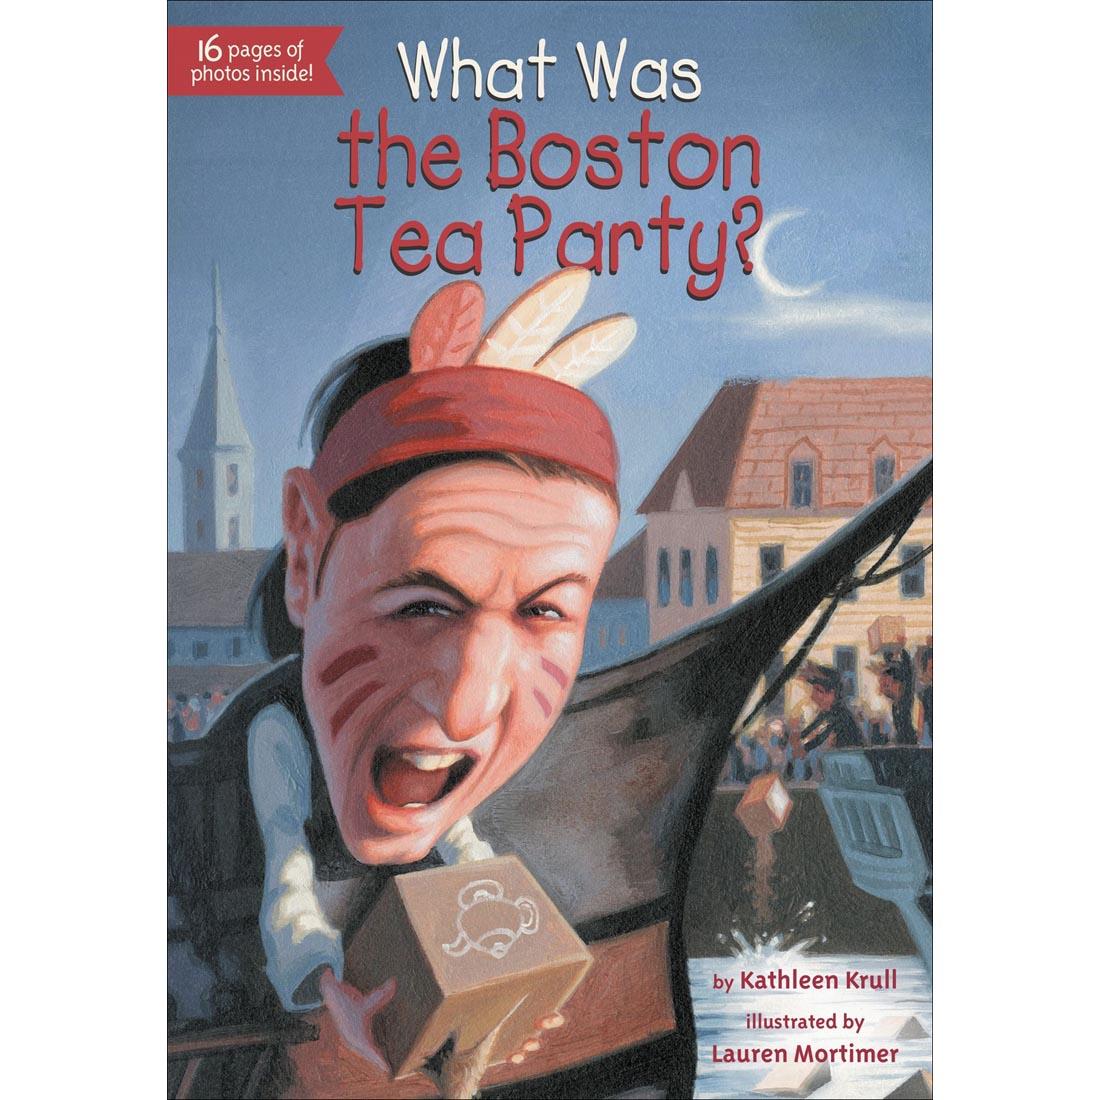 What Was the Boston Tea Party? Paperback Reader